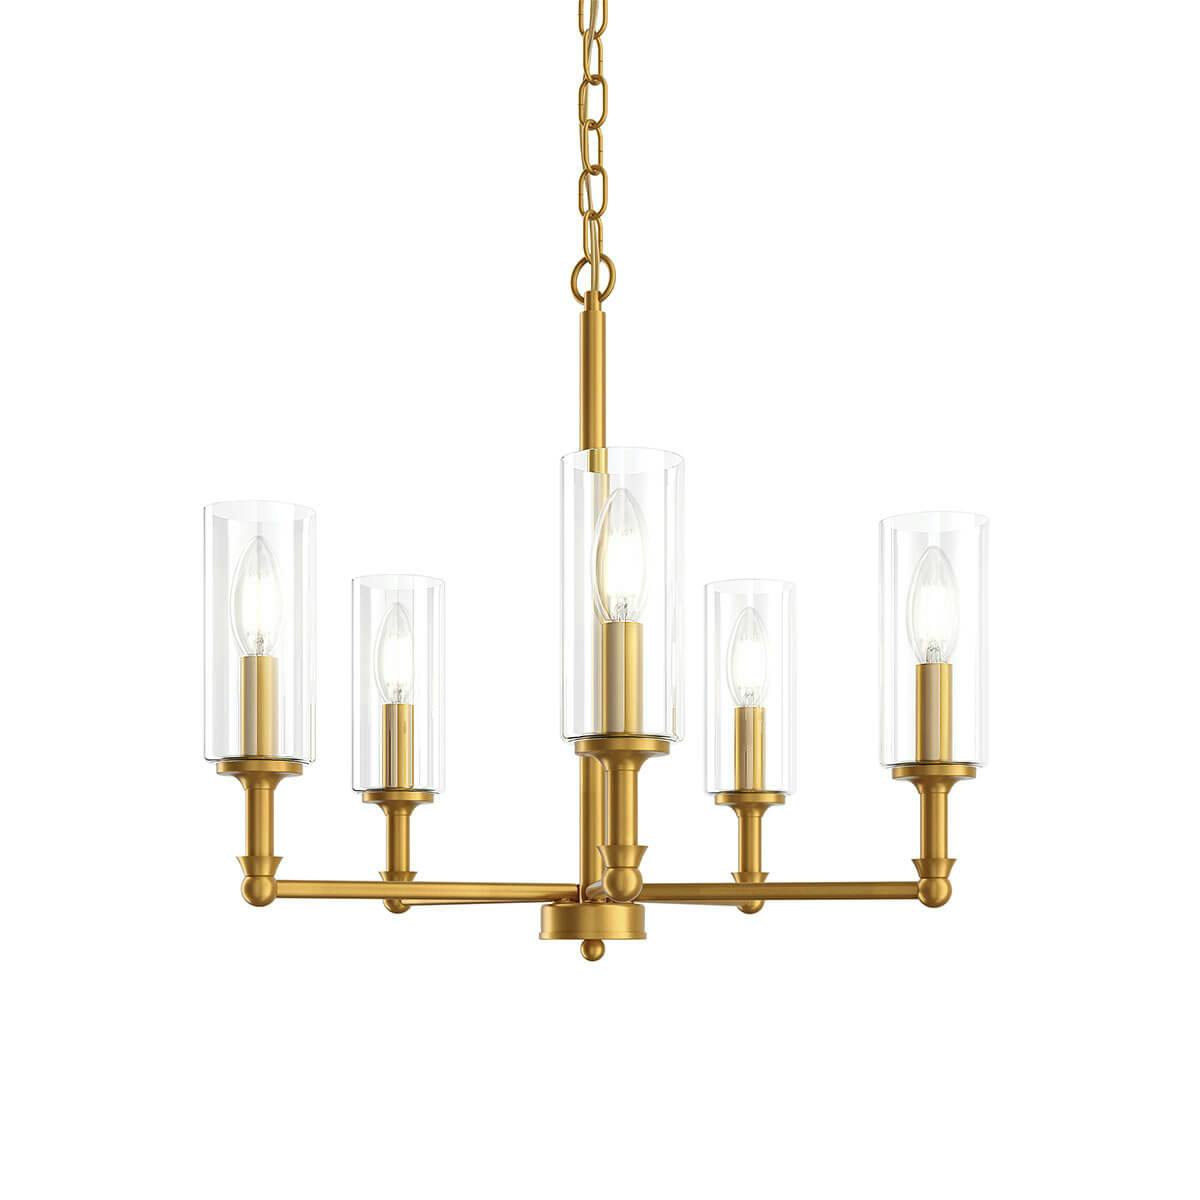 Soniat 5 Light Chandelier Classic Gold without the canopy on a white background